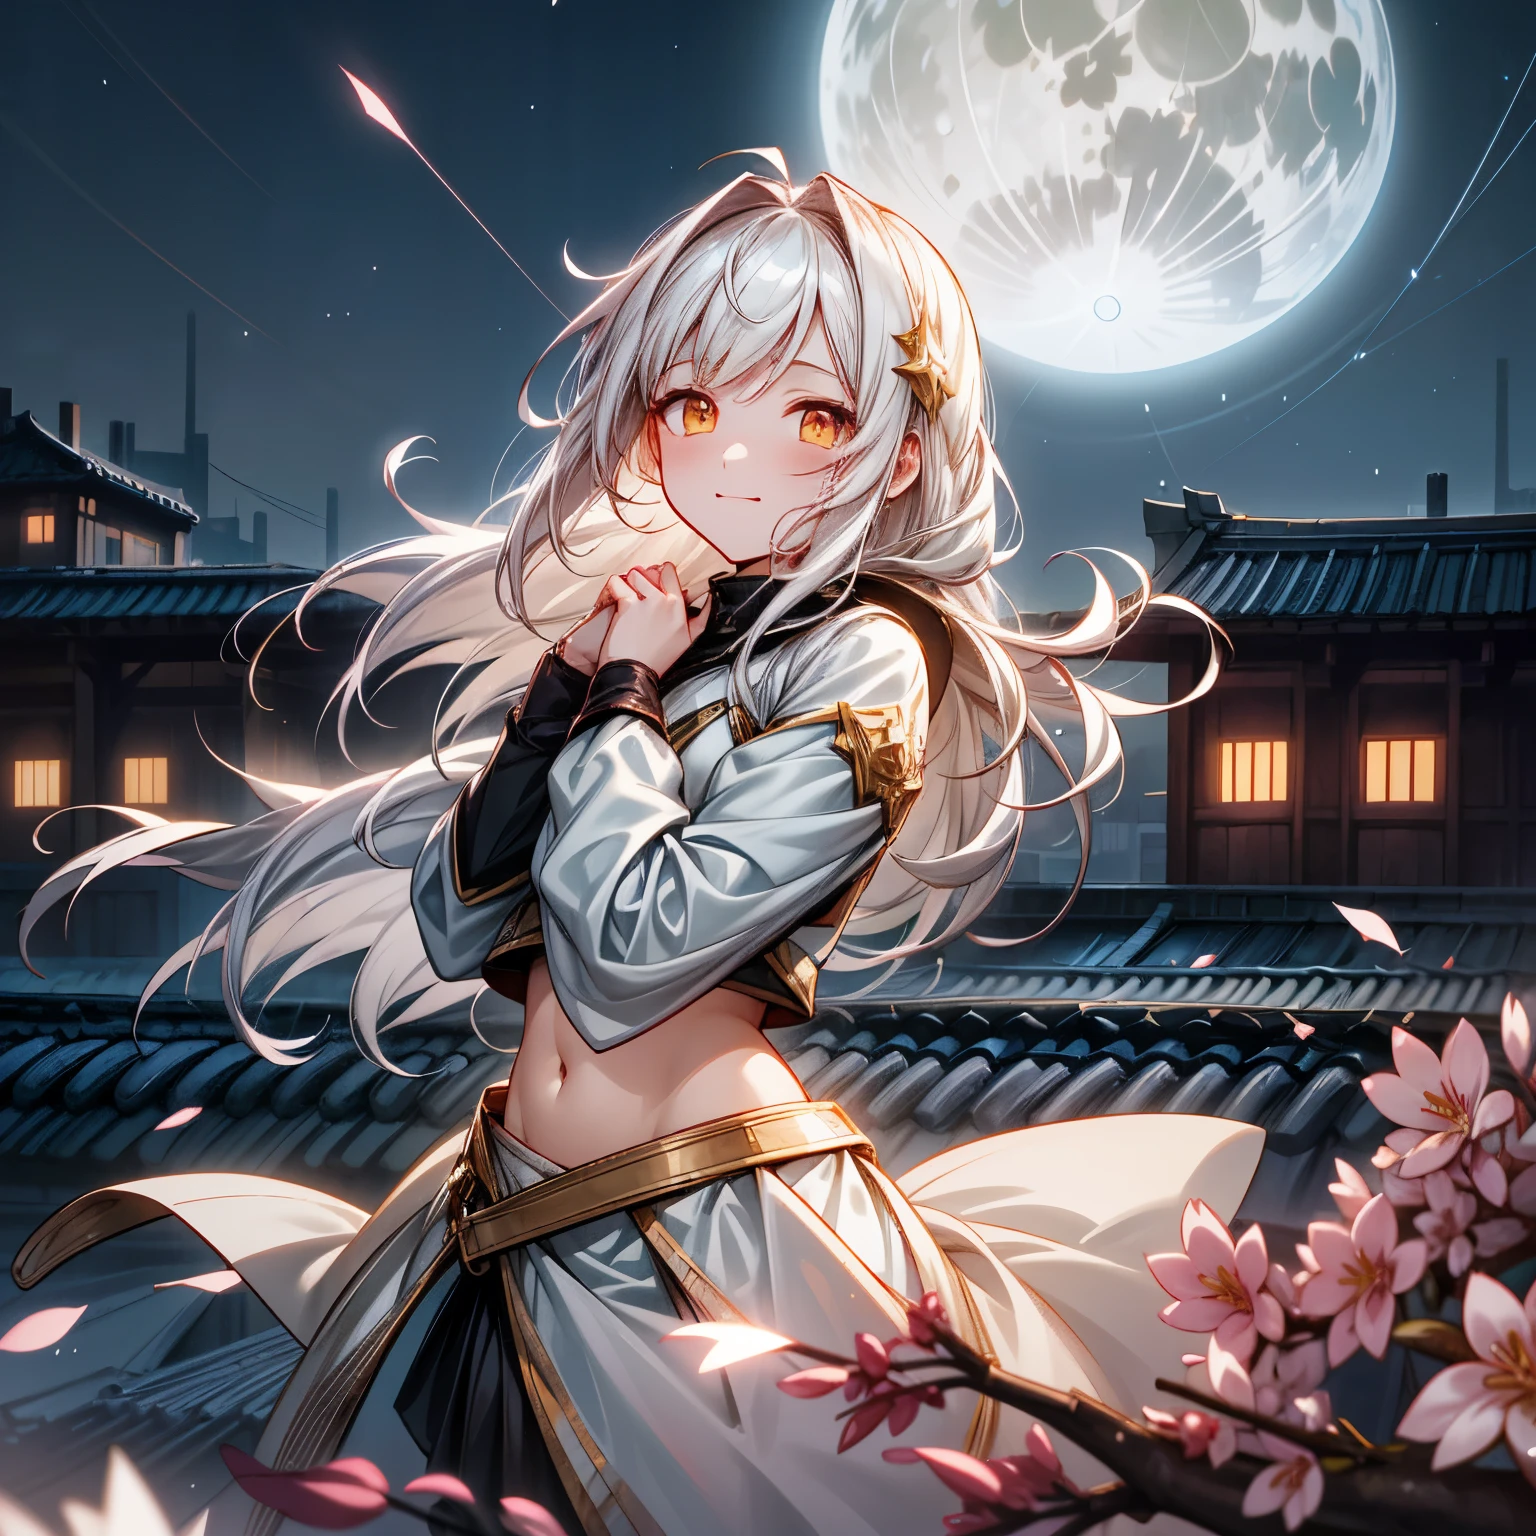 Anime girl, 1 anime girl, white hair, golden eyes, glowing eyes, thick hair, blown by the wind, crop top, skirt, blush, night, sakura flowers garden, stars, sunlight, starlight, fullmoon, rooftop garden, light city landscape, white skin, black and white outfit, beautiful, happy pose, Hands behind 